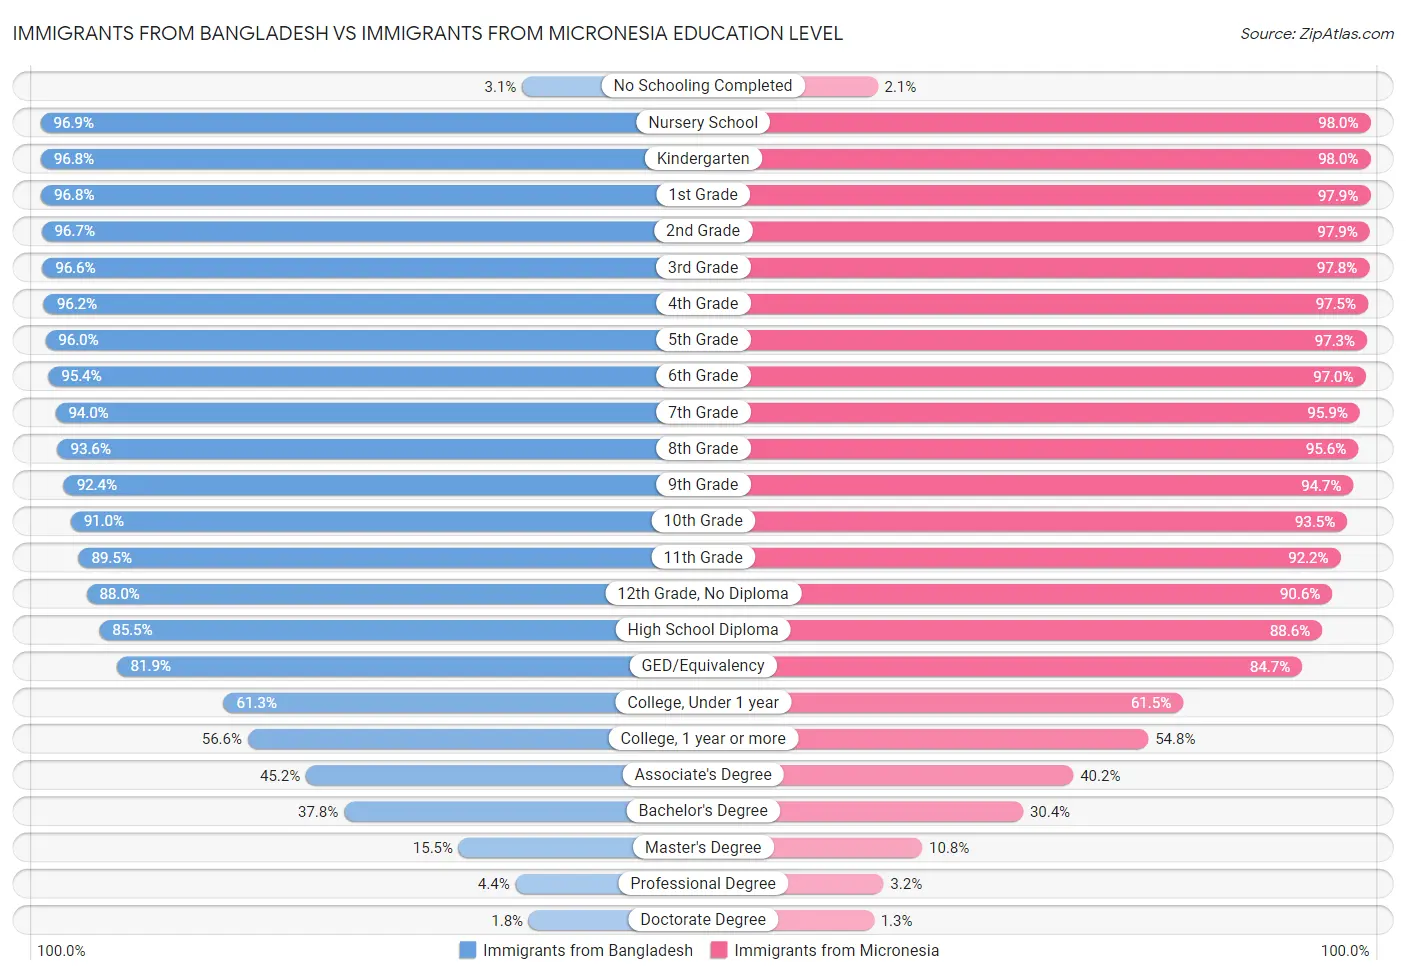 Immigrants from Bangladesh vs Immigrants from Micronesia Education Level